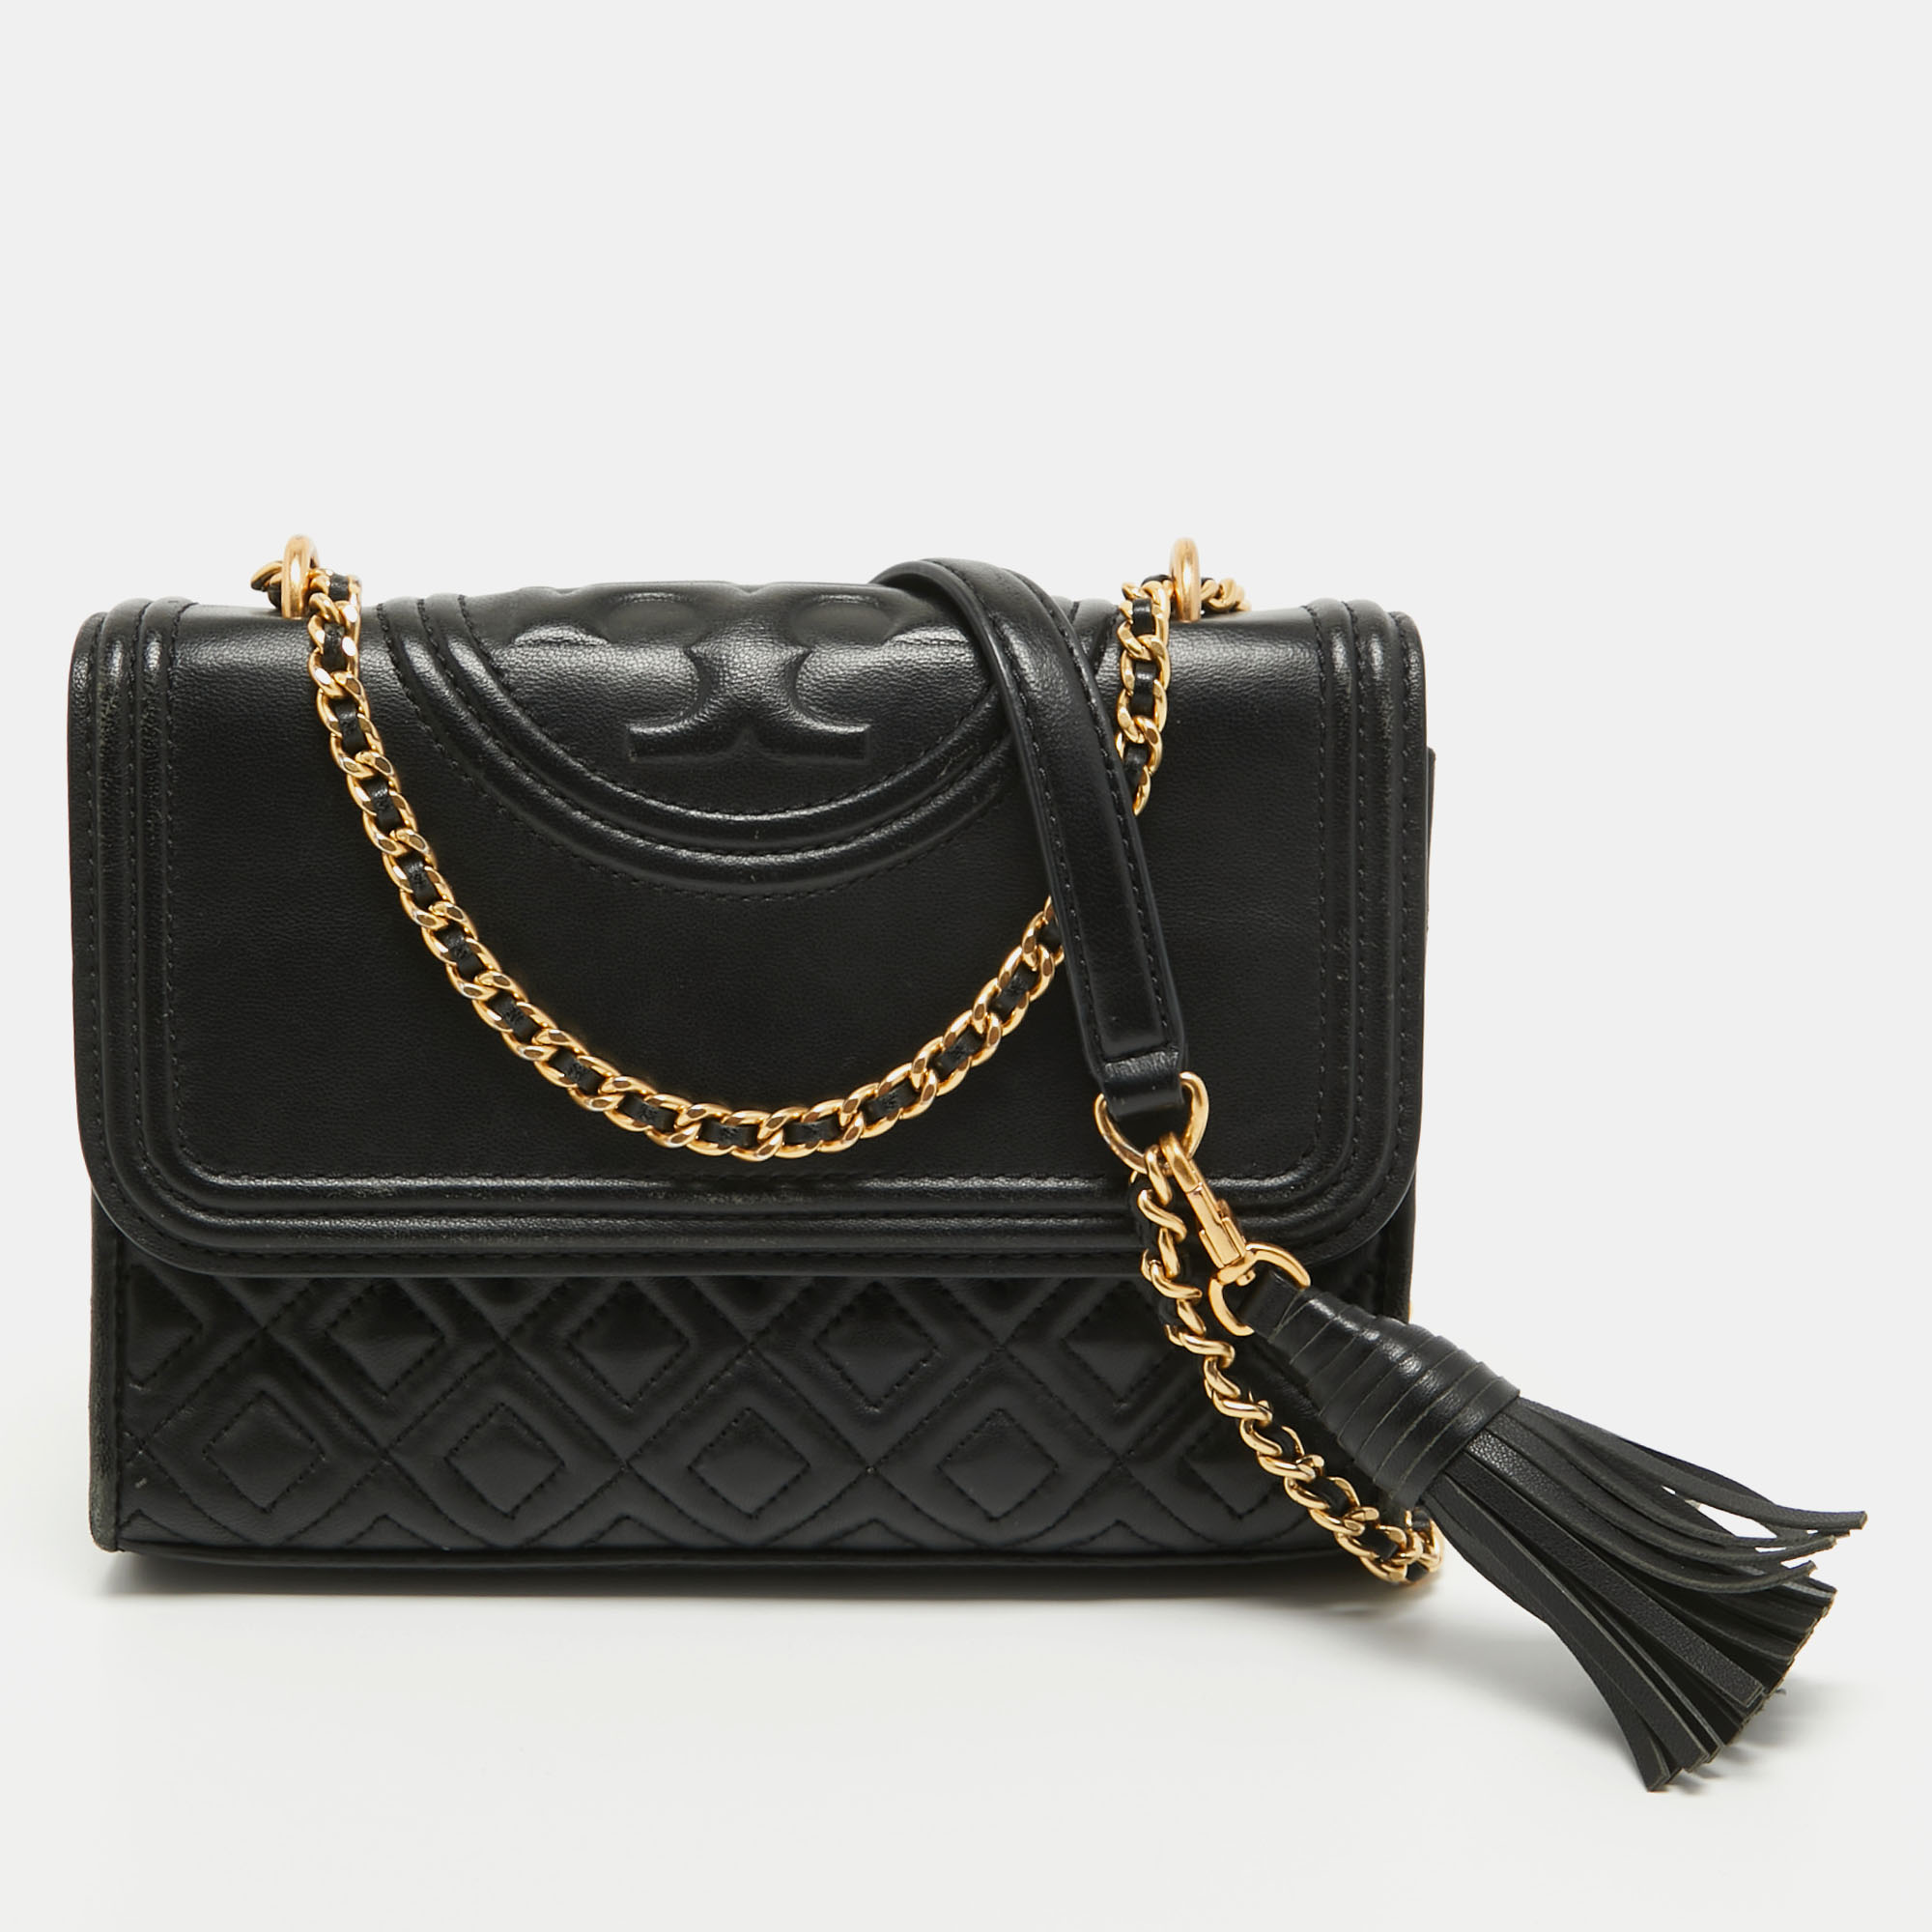 Tory Burch Black Leather Small Fleming Shoulder Bag